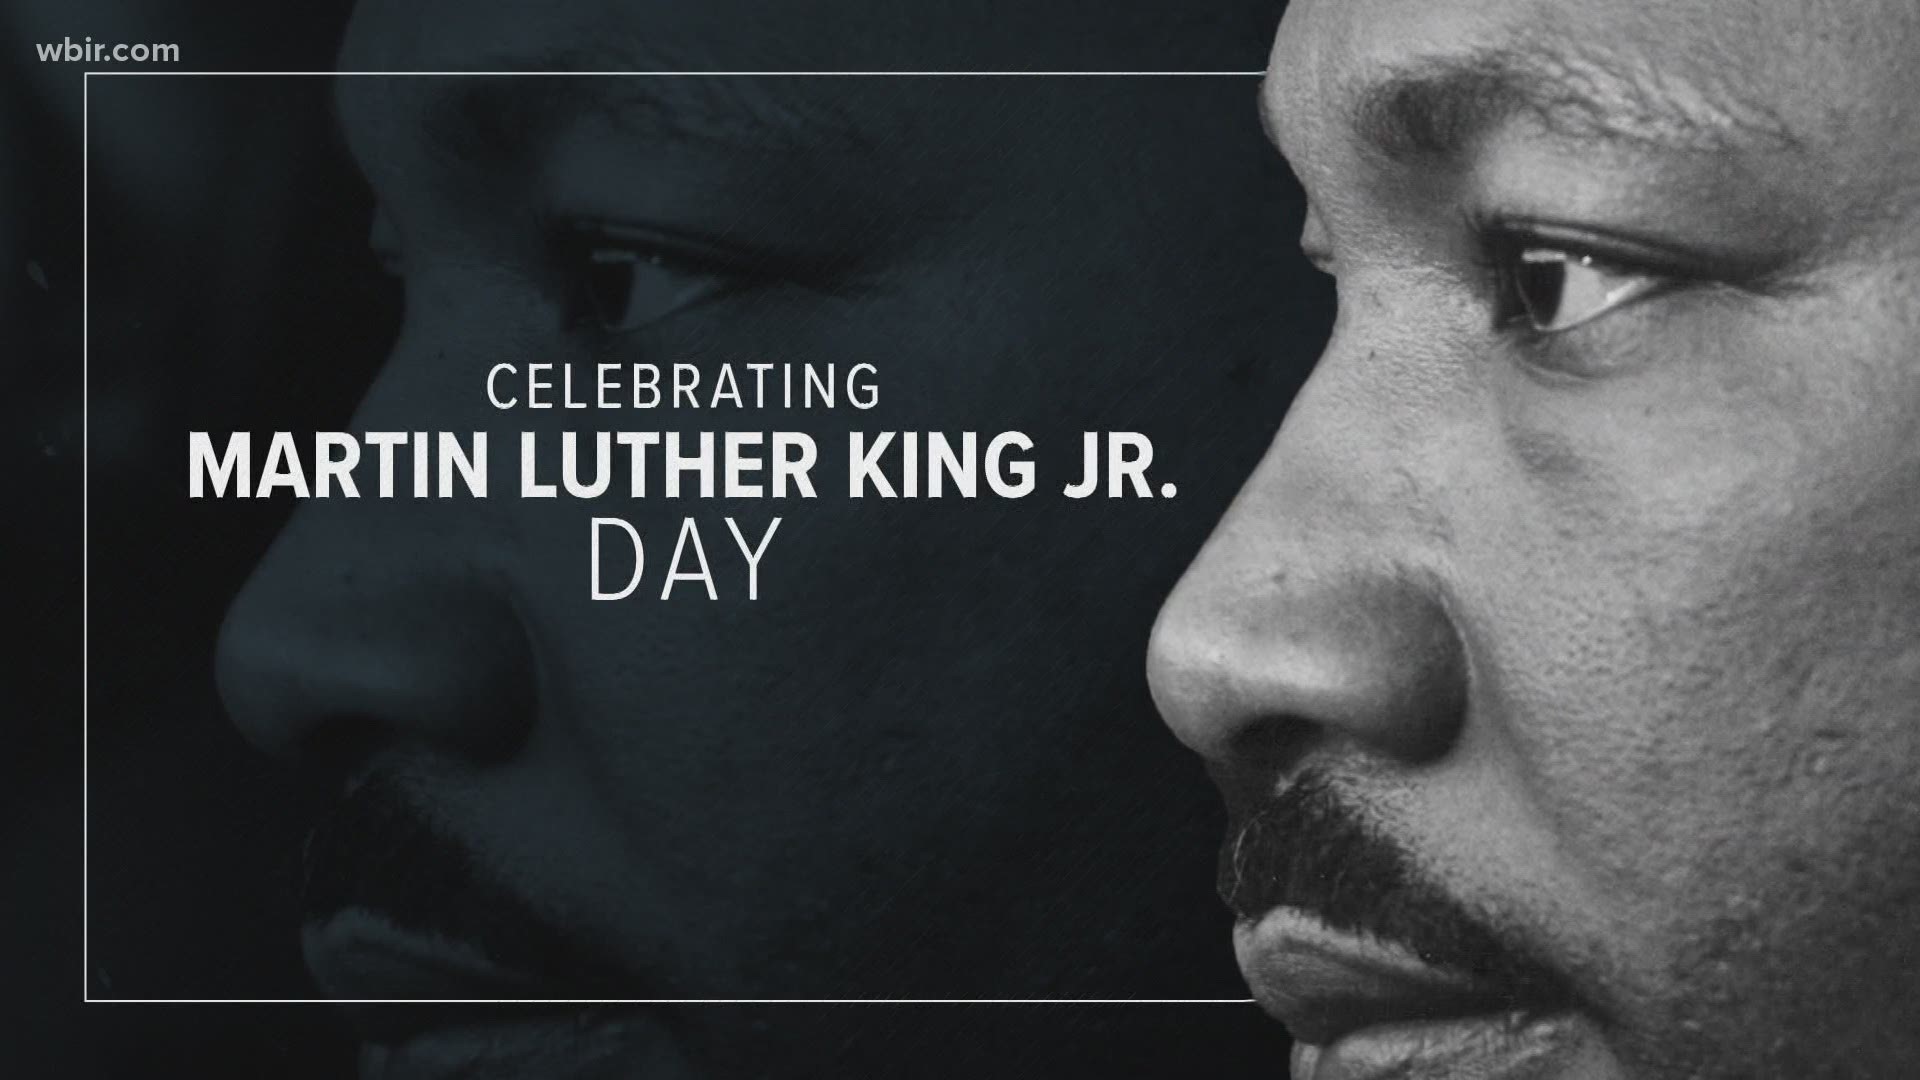 The Martin Luther King Jr. Commemorative Commission is celebrating MLK Day differently during the pandemic